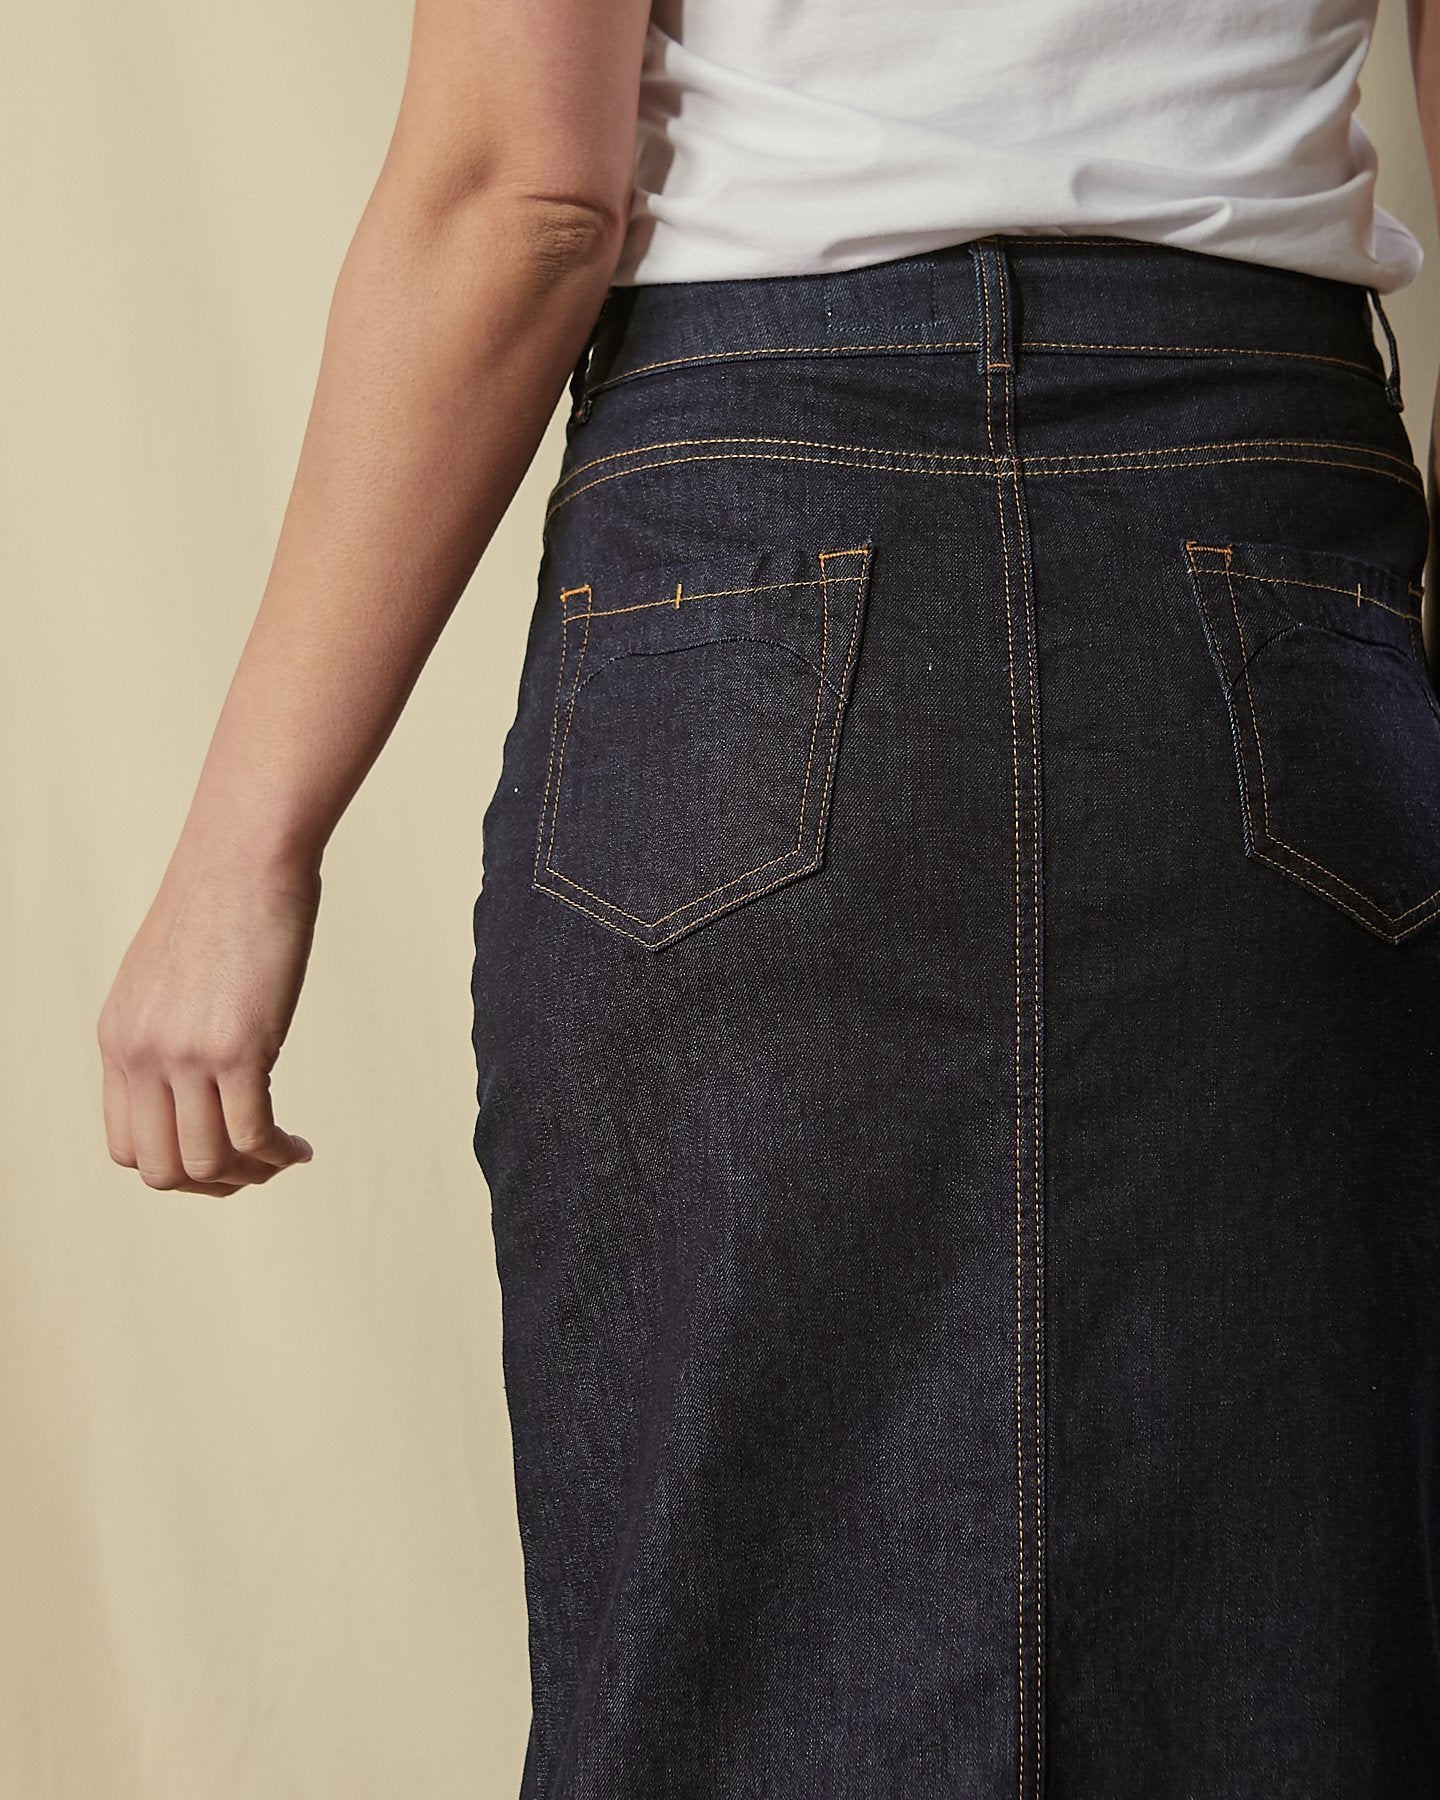 Close back view of stretchy, organic cotton, long denim skirt showing back pockets and belt loops.